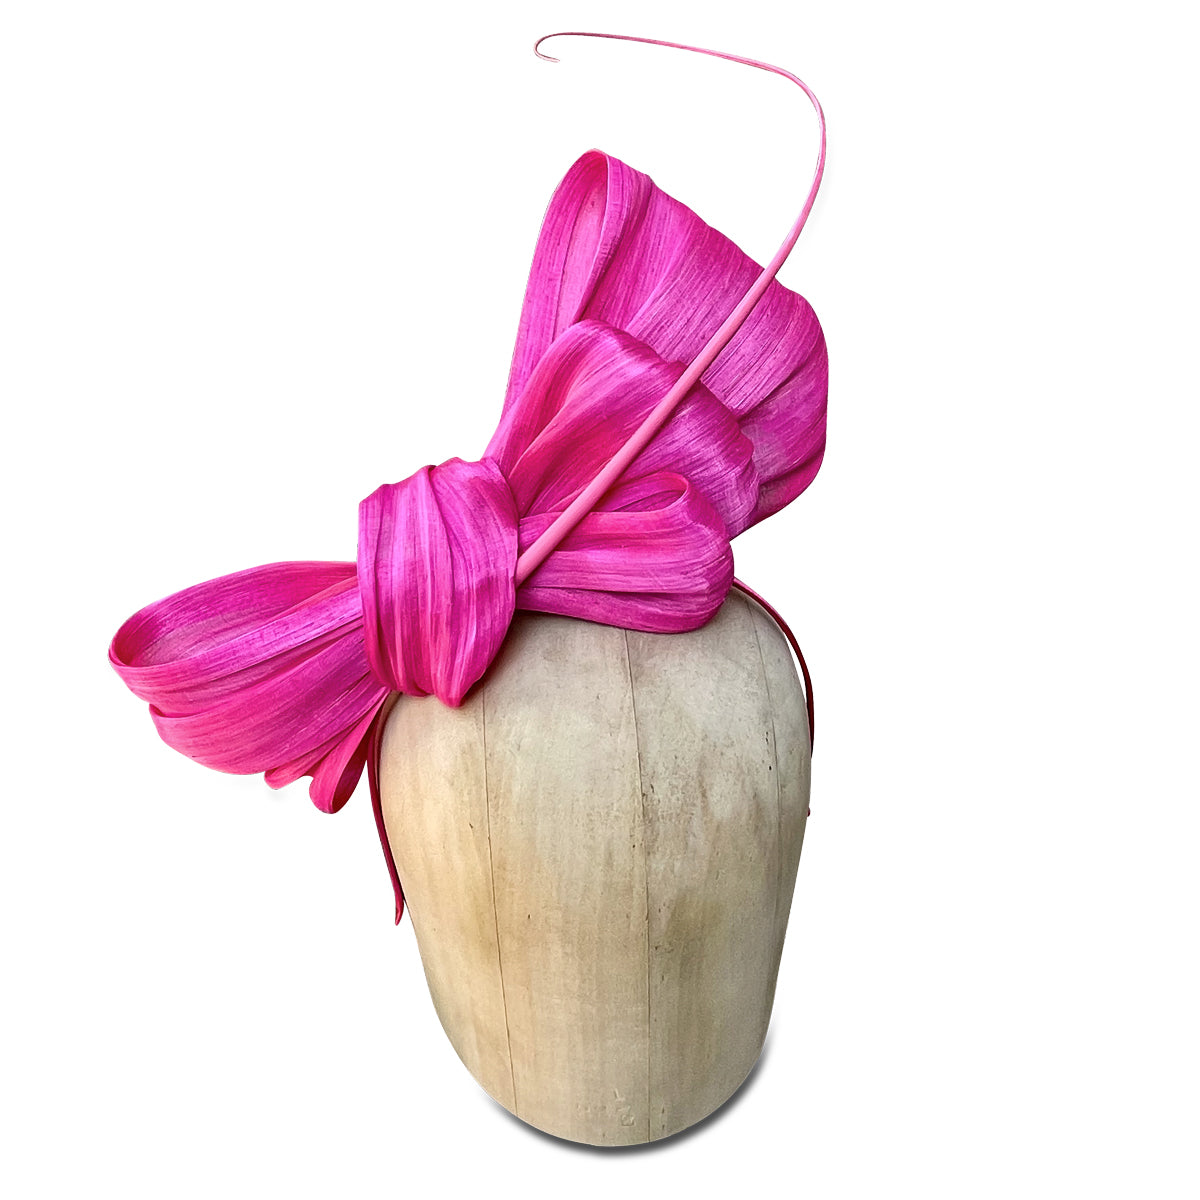 KDBow Fascinator | Made-to-order fascinator from Cha Cha's House of Ill Repute in NYC